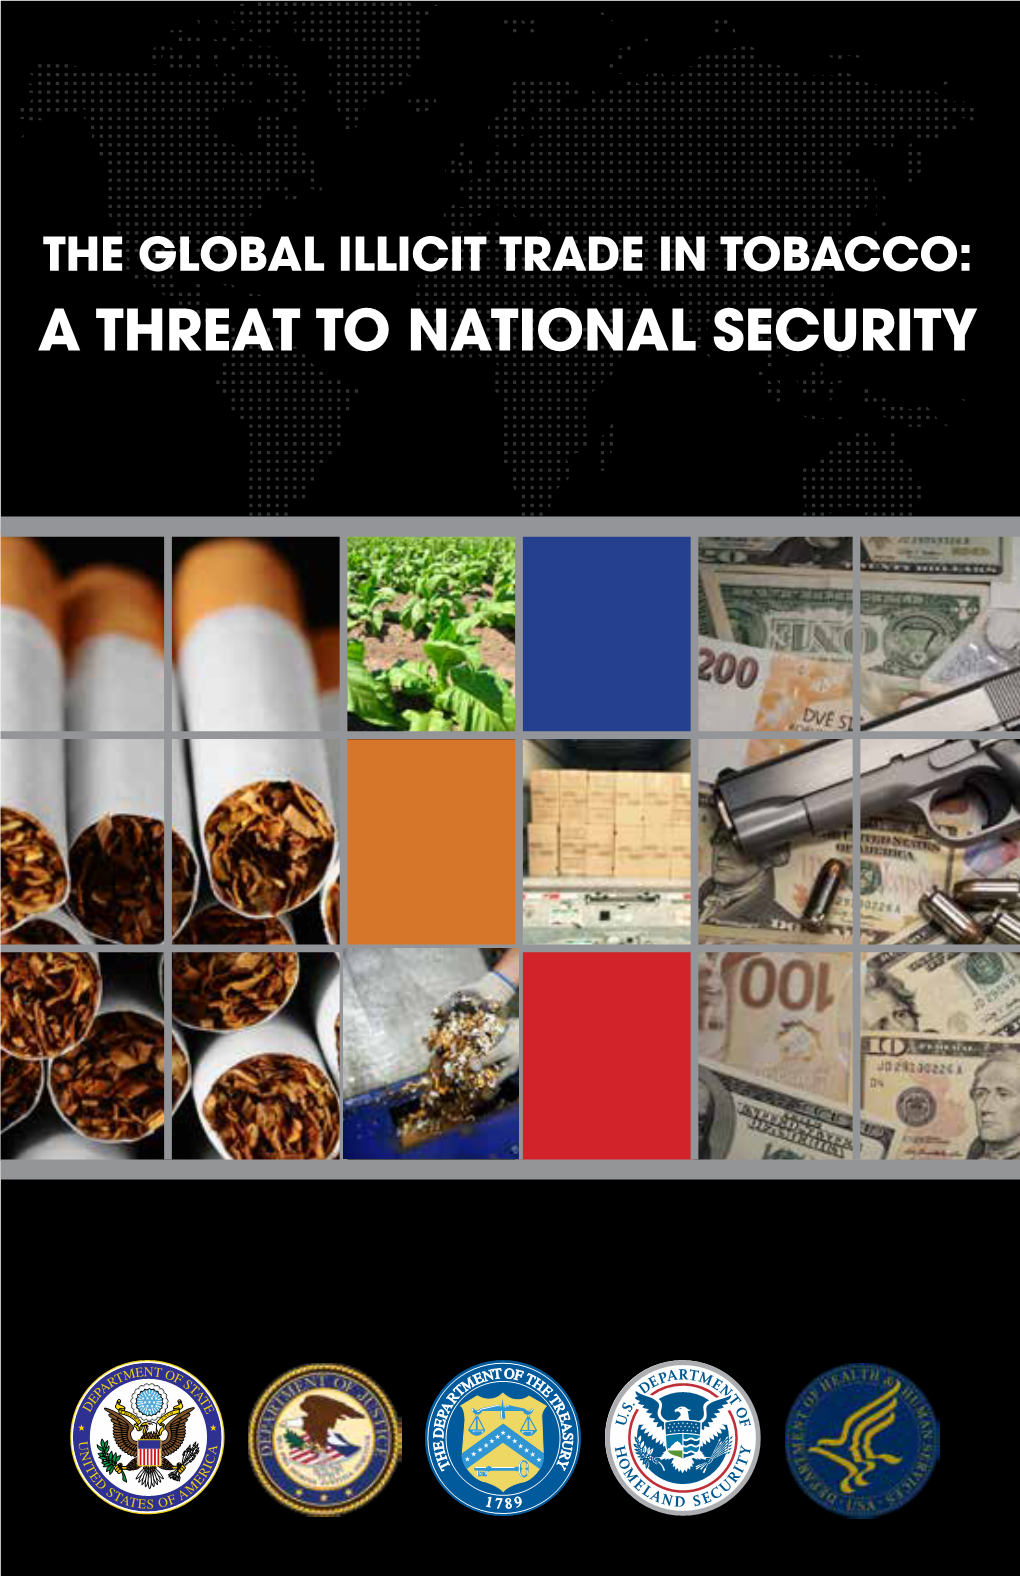 The Global Illicit Trade in Tobacco: a Threat to National Security